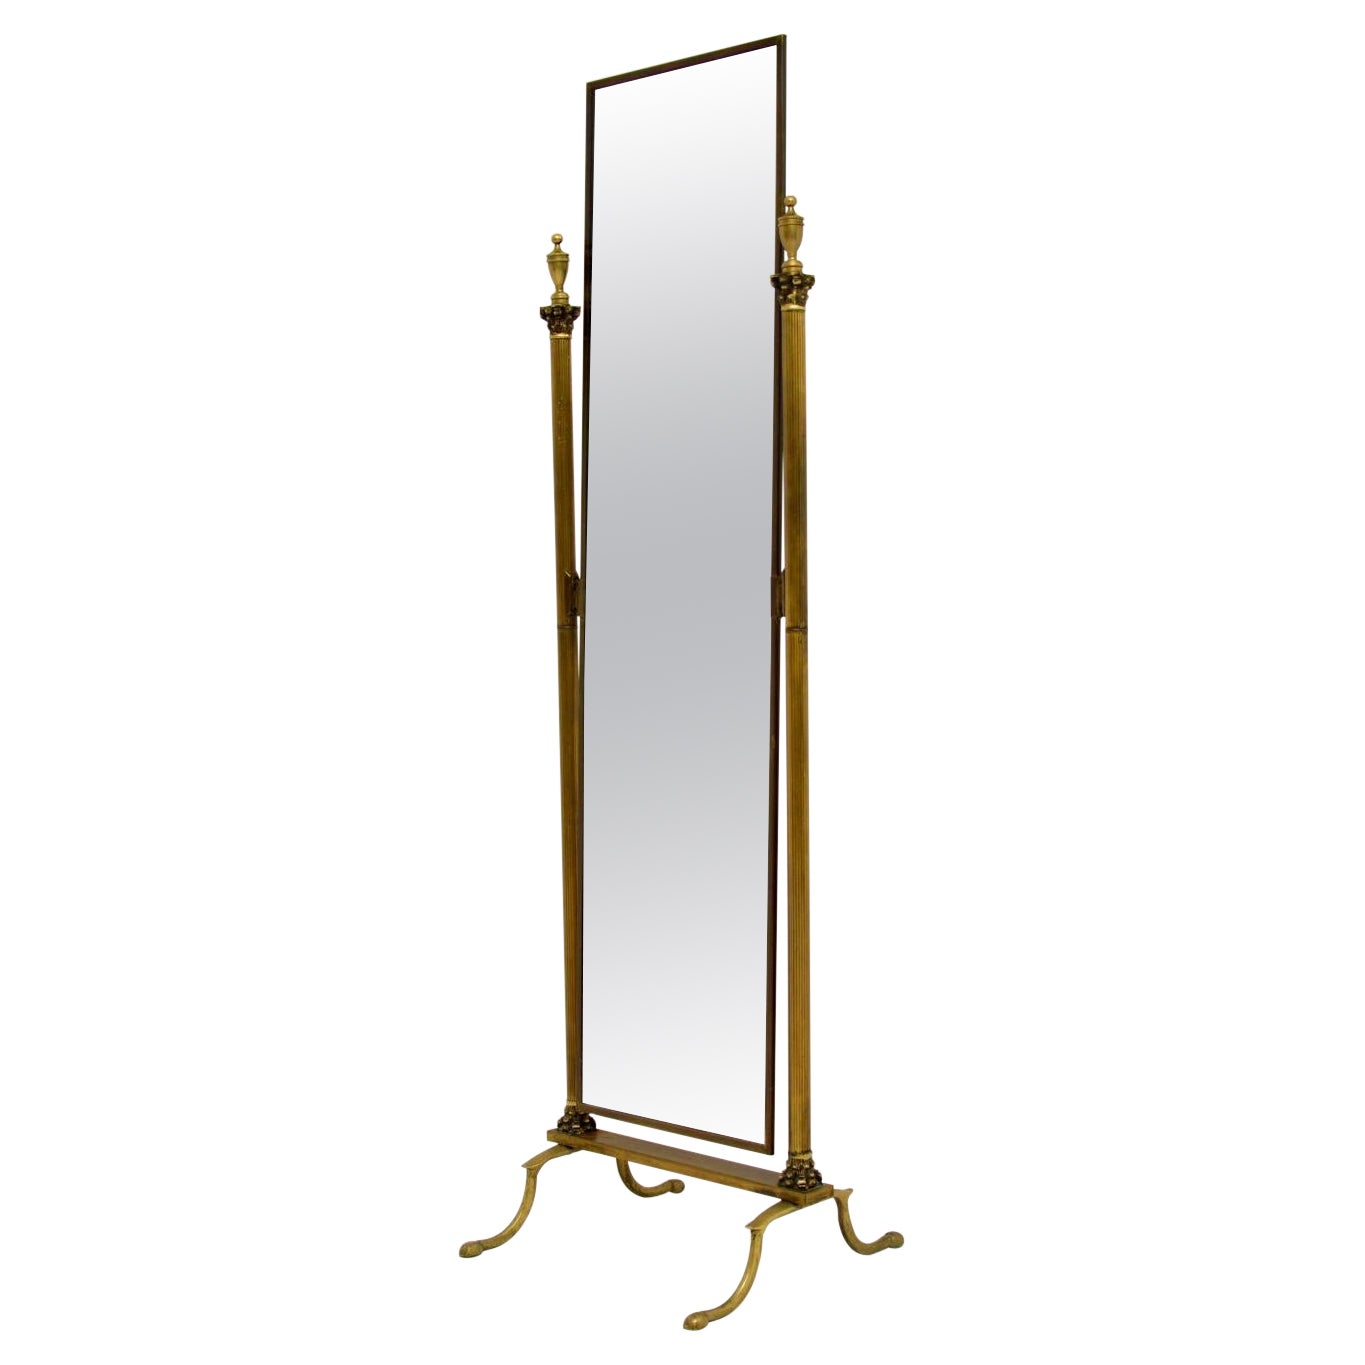 Antique Neo-Classical Style Brass Cheval Mirror By Peerage